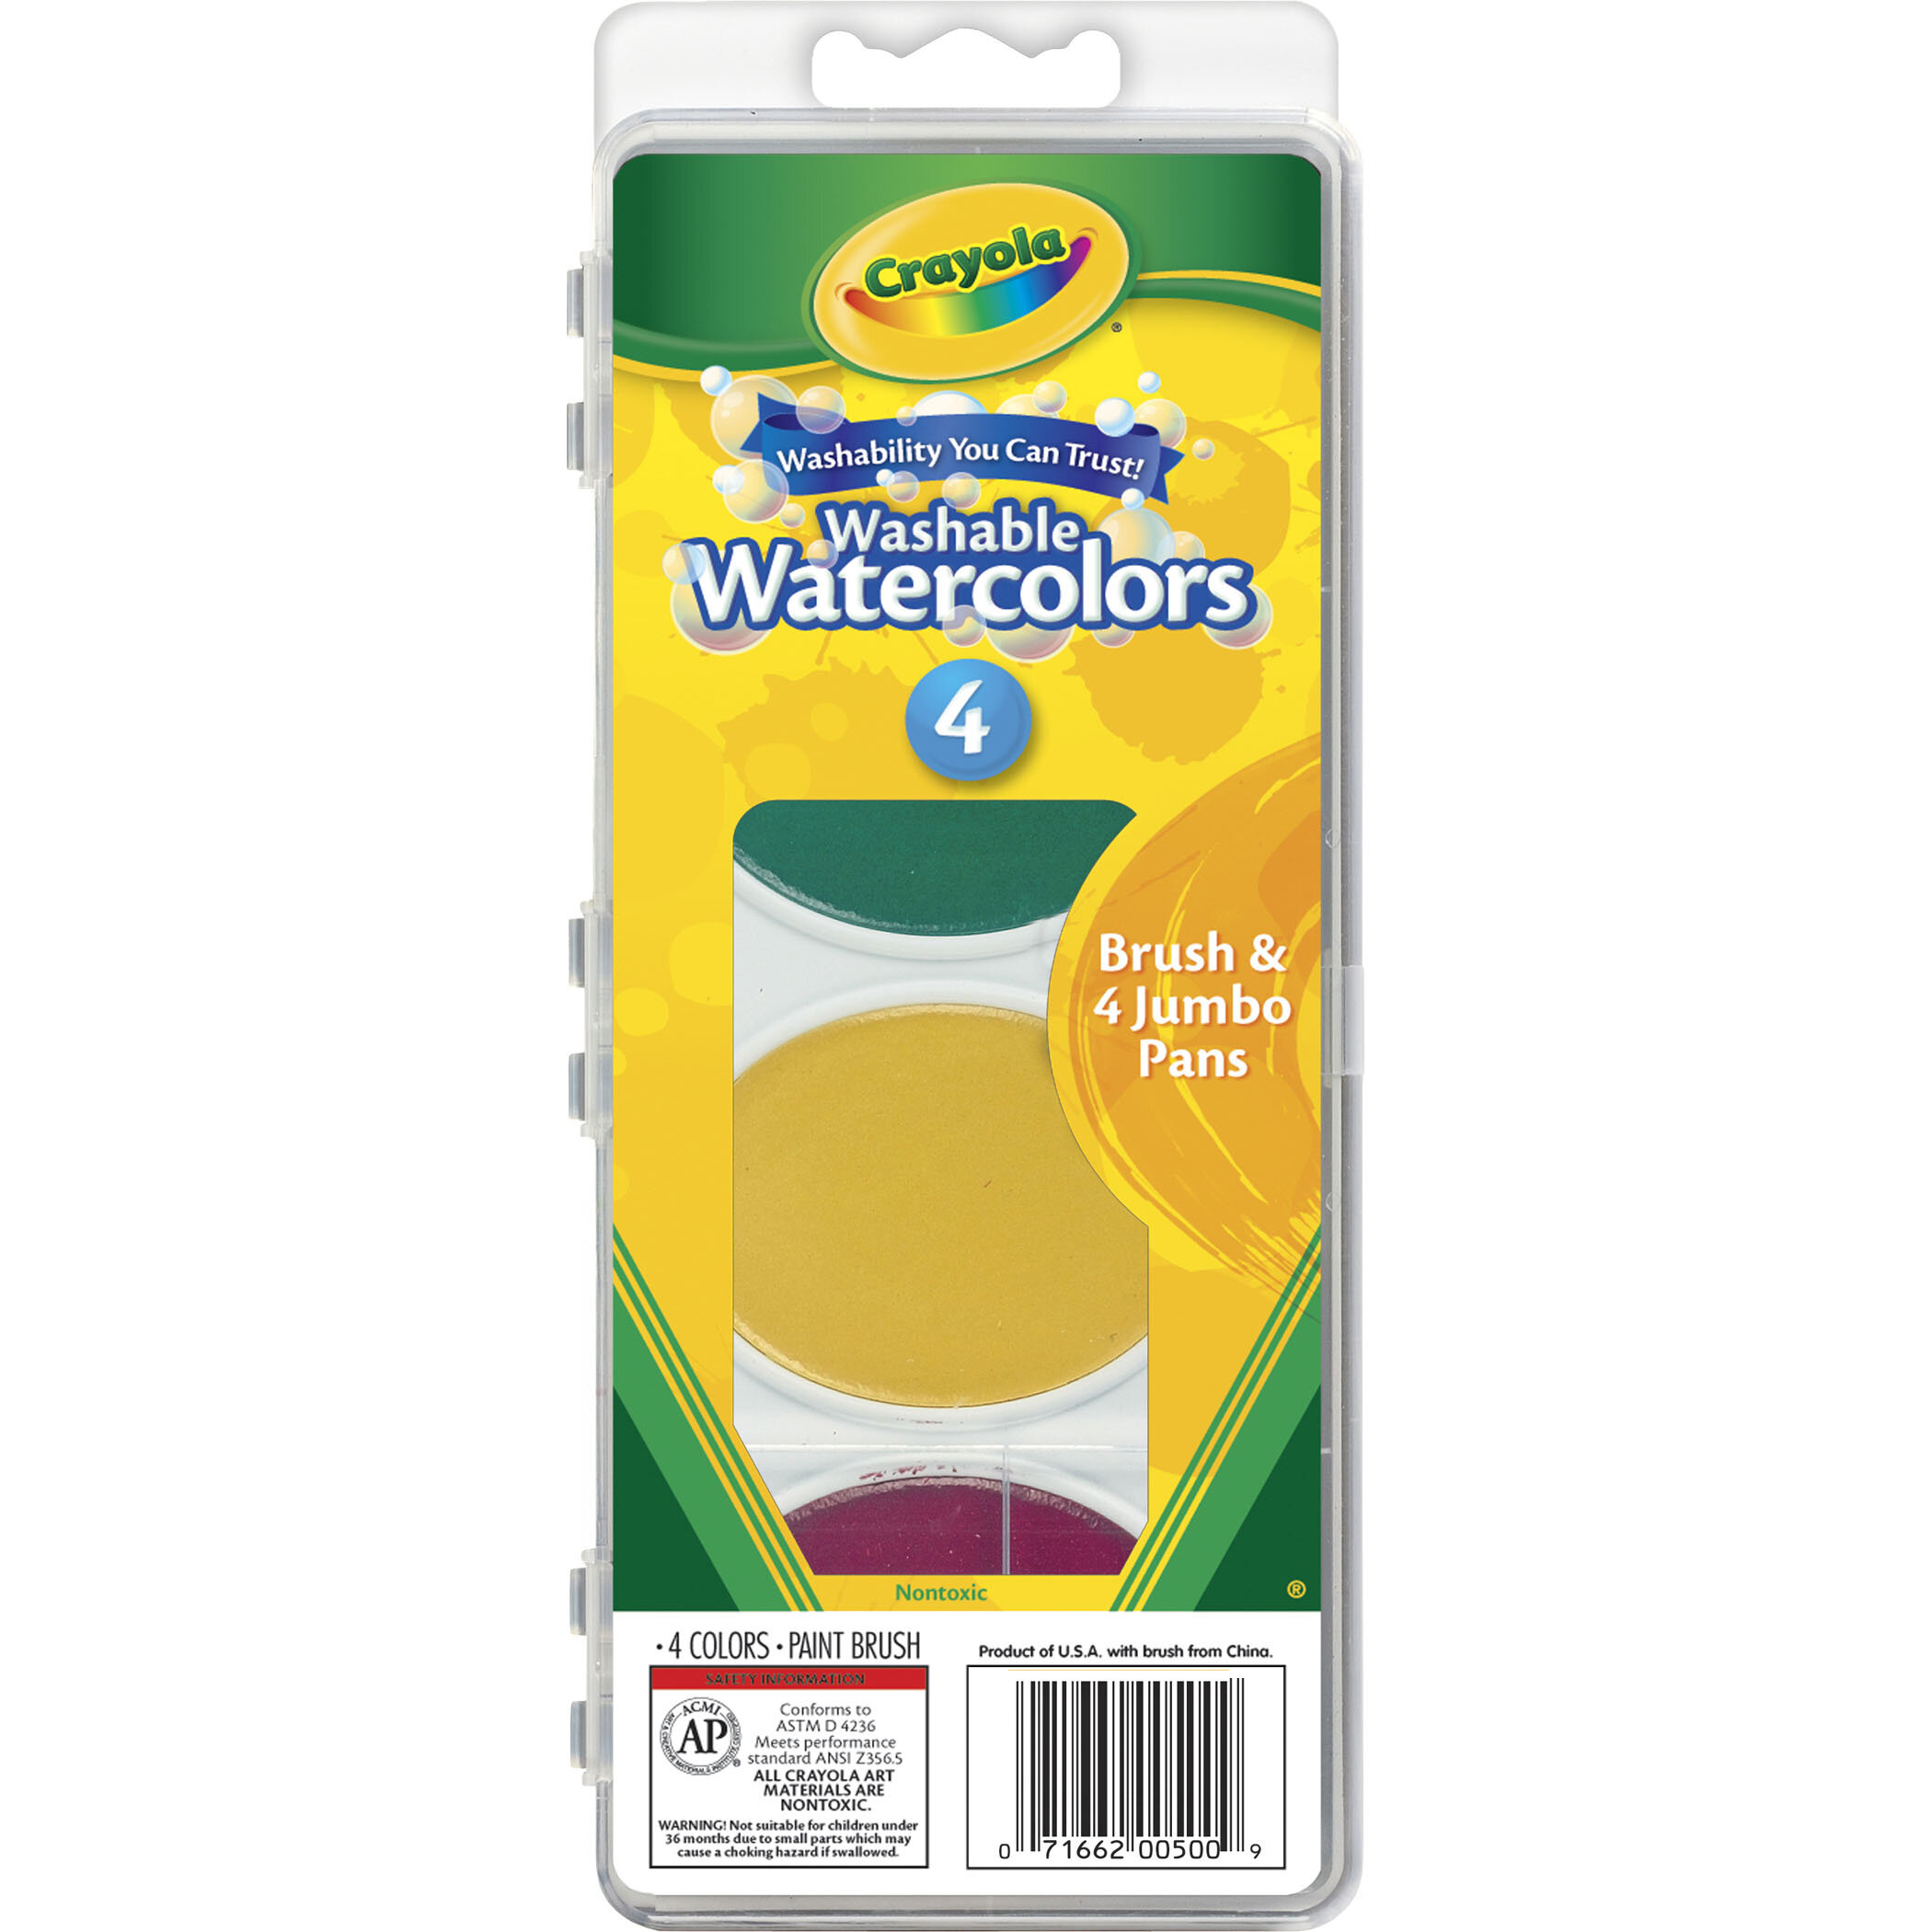 Crayola Paint Watercolors Washable With Paint Brush - 8 Count